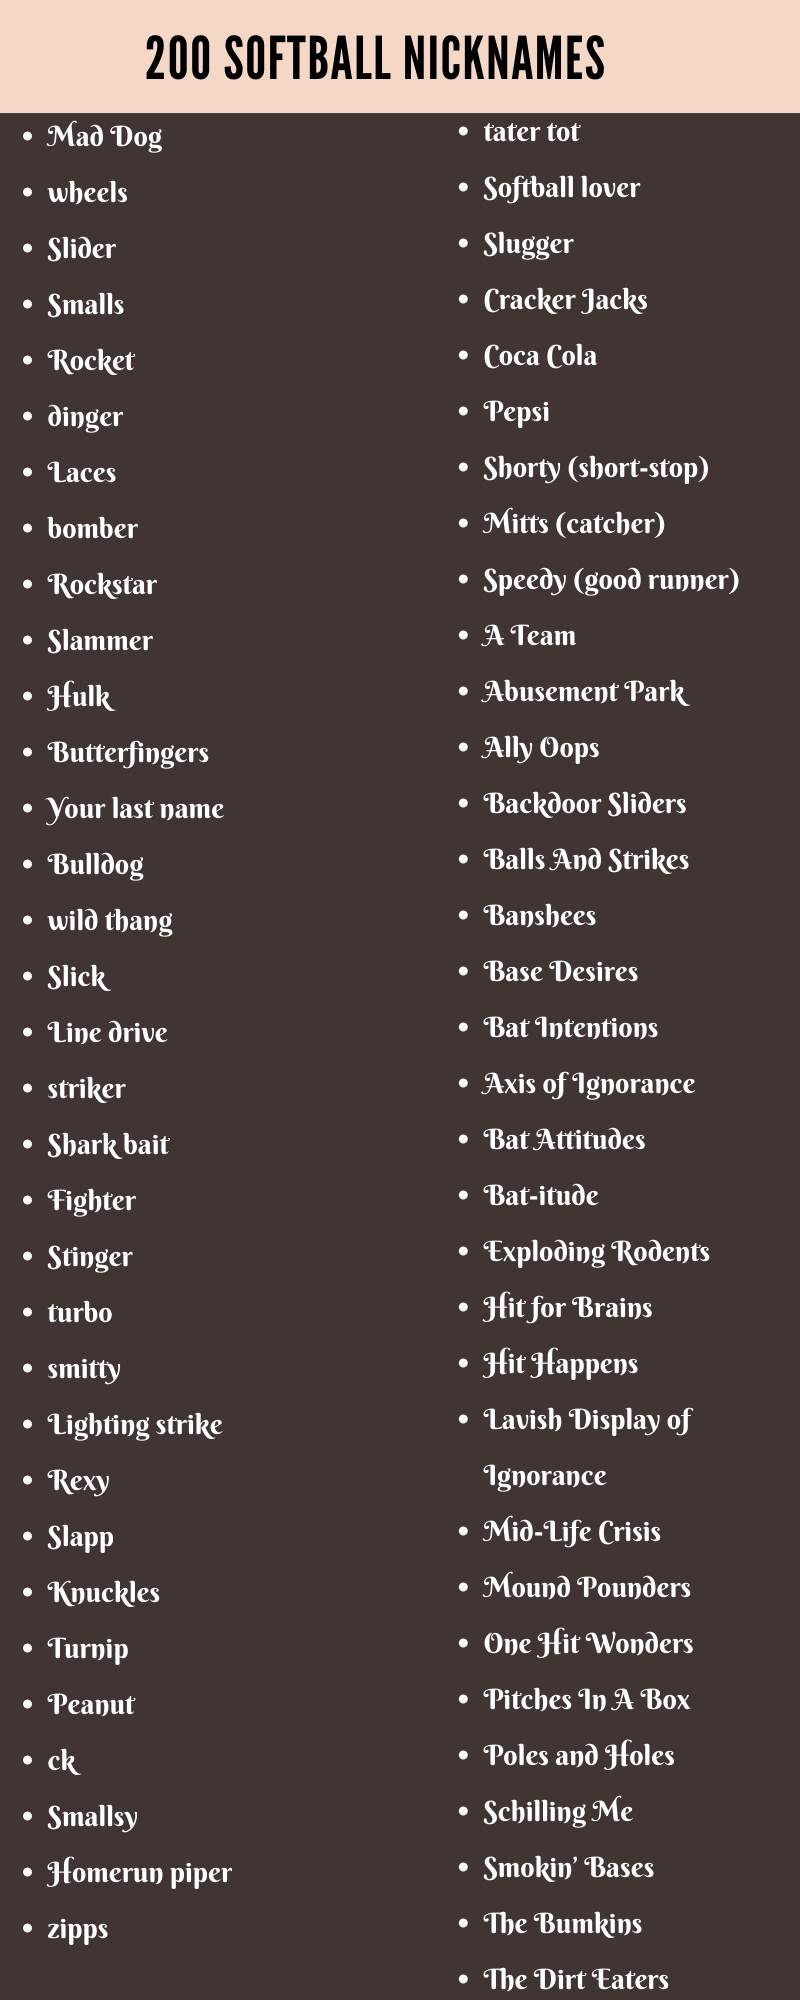 In this article, we will share with you some cool and funny Softball Nicknames. You can use these nicknames anywhere you want for free. Make sure to select such a name that will impress everyone. A nickname is a word used to describe someone or something. In this case, it refers to a person who uses a certain name. Nicknames are usually used by people who share a similar personality trait or characteristic. They might use them to refer to each other, or even just to their friends. In fact, there are many different reasons why people use nicknames. Some people use them to identify themselves better. Others use them to show off their uniqueness. And others use them to express their feelings more easily. Regardless of the reason, nicknames are extremely useful. They allow us to quickly communicate our thoughts and feelings to others. However, sometimes, it can be difficult to come up with a good nickname for ourselves. We often struggle to think of a witty way to describe ourselves. But luckily for you, we‘ve collected a massive list of catchy, funny, and original Softball Nicknames for you to choose from. So, let’s start browsing through these amazing nicknames. Softball Nicknames 1.	Adrenaline Rush 2.	Batting Ballers 3.	Axis of Ignorance 4.	Bat-itude 5.	Praying For Rain 6.	Rocket 7.	Hammer Time 8.	Chaos 9.	Hit Runners 10.	The Cyclones 11.	Batters Up! 12.	Ice Queens 13.	Natural Selection 14.	Myth Busters 15.	Cleats on Fire 16.	Vengeance 17.	Human Targets 18.	Impact Velocity 19.	The Hazmat Suits 20.	Unbeatable 21.	Intimidators 22.	Stinger 23.	Aces Of Bases 24.	Smallsy 25.	No Mercy 26.	Nemesis Genesis 27.	Rockstar Lifestyle 28.	Lighting strike 29.	Dugouts 30.	Master Batters Cool Softball Nicknames 31.	wheels 32.	Apocalypse 33.	Base Invaders 34.	Caught Looking 35.	Butterfingers 36.	Catch 22 37.	Mid-Life Crisis 38.	El Diablo 39.	The Leftovers 40.	Don’t Stop Ballieving 41.	Triumph Towers 42.	Nerves of Steel 43.	Bat Intentions 44.	Freaks And Geeks 45.	Open Season 46.	Laces 47.	We Bruise Easily 48.	The Living Legends 49.	Softball lover 50.	Reigning Champions 51.	Instant Classics 52.	Glove Love 53.	Smalls 54.	The Bumkins 55.	The Antagonists 56.	Pink Panthers 57.	Aftershock 58.	The Tomahawks 59.	Angry Chicks 60.	Turnip Unique Softball Nicknames 61.	Knuckles 62.	Avalanche 63.	Exploding Rodents 64.	Zeroes to Heroes 65.	Hitting Machine 66.	No Sympathy 67.	Prison Rules 68.	Cranium Krusherz 69.	Inferno HELL 70.	In The Zone 71.	turbo 72.	Ally Oops 73.	Rampage 74.	Soft Serves 75.	Nice Snatch 76.	The Dirt Eaters 77.	The Trailblazers 78.	Hit for Brains 79.	Pepsi 80.	Brokebat Mountain 81.	The Go Getters 82.	The Nerve Wreckers 83.	Swing and Pray 84.	Silver Bullets 85.	The Game Changers 86.	striker 87.	Balls to the Wall 88.	Rockstar 89.	The Elite 90.	Dream Killers Funny Softball Nicknames 91.	Rexy 92.	The Unstoppables 93.	Fighter 94.	The Super Strikers 95.	Leather and Lace 96.	Head Hunters 97.	The Strikers 98.	Line Drivers 99.	The Grand Salamis 100.	Benchwarmers 101.	Cuties From The Block 102.	The Bunt Cakes 103.	The Screwballs 104.	smitty 105.	Hit Happens 106.	Win Or Lose 107.	Breaking Balls 108.	Mitts 109.	The Overeasies 110.	End of The Bench 111.	A Team 112.	The Shatterers 113.	Base Desires 114.	Behind The Bench 115.	Hit Squad 116.	Ponytail Express 117.	Blood and Sweat 118.	Power Forever 119.	Beast Mode 120.	Home Run Hitters Creative Softball Nicknames 121.	Black Ice 122.	Broken Bones 123.	Village Idiots 124.	The Believas 125.	Dirty Divas 126.	Speedy 127.	Balls And Strikes 128.	zipps 129.	That Better Team 130.	wild thang 131.	Beard View Mirrors 132.	Bomb Squad 133.	Brute Force 134.	Crash Test Dummies 135.	bomber 136.	Pitches In A Box 137.	The Swingers 138.	Slick 139.	Ice Breakers 140.	Divas Achievas 141.	Brews on First 142.	The Imperials 143.	Poles and Holes 144.	Benchwarmer Bombers 145.	One Hit Wonders 146.	Slugger 147.	Homerun piper 148.	The Scorpions 149.	The Prodigies 150.	Slider What are types of nicknames you could use? •	Personality based nicknames •	The shortened full name nickname. •	Noun nicknames •	The different language nickname. The backstory nickname. •	The gangsta type names. •	The sickening couple nickname •	Work based names •	Incidental nicknames Things to Remember While Choosing a Nickname Nicknames play a huge role in how we interact with others. We use them to identify ourselves, connect with other users, and build relationships with each other. Below are some tips to choose a good nickname. Brainstorm Your Ideas Start by brainstorm what words could fit into a nickname. In my Softball Nicknames, I use combinations that are appealing to the eyes, interesting to others, convey my personality, and are easy to spell and pronounce. For example, here are some of the best Softball Nicknames that I have brainstormed: 151.	Help Wanted 152.	Scared and Hitless 153.	Victorious Secret 154.	Designated Hitters 155.	Cracker Jacks 156.	Bat’s Life 157.	The Grim Reapers 158.	Backdoor Sliders 159.	Killer Aim 160.	The Know-Nothings 161.	Bunt Monkeys 162.	Bat News 163.	Wasted Talent 164.	Smokin’ Bases 165.	Lost Boys 166.	The Earthquakes 167.	Quit Your Pitching 168.	Mound Pounders 169.	Banshees 170.	Inglorious Batters 171.	Shark bait 172.	Pink Sox 173.	Around the Horn 174.	Bat Attitudes 175.	The Grass Stains 176.	Weakened Warriors 177.	Airborne 178.	Work It 179.	The Champs 180.	Big Al’s Heimers Shortlist Your Ideas & Suggestions Once you’re done brainstorming, go through your ideas and select a handful of them. You can keep those that are catchy, memorable, and reflect your personality. Remove the rest of them and get to the next step. Keep It Short and Simple We have seen in a lot of places that short and simple nicknames are liked by people a lot. In fact, people love it when you call them with a simple nickname. Someone lucky would be able to get a short nicknames these days because all the short ones are already taken by people. Here are some examples of short and simple Softball Nicknames: 181.	The Golden Eagles 182.	Ice Cold Pitchers 183.	We Got The Runs 184.	Line drive 185.	Yager Bombers 186.	Coca Cola 187.	Batting Divas 188.	The Skidmarks 189.	Catchers In The Rye 190.	Legends 191.	Schilling Me 192.	Pitch Perfect 193.	Uncommonly Good 194.	dinger 195.	Chin Musicians 196.	Peanut 197.	Terror Wrists 198.	Abusement Park 199.	Slapp 200.	Shocker Rockers 201.	The Wolfpack 202.	Slammer 203.	Velocity 204.	Shorty 205.	Pancake Batter 206.	Ump Yours 207.	Minimum Wagers 208.	Window Lickers 209.	The Switch Hitters 210.	Smooth Operators Get Some Feedback & Suggestions Now that you’ve selected a few Softball Nicknames ideas, it’s time to gather some feedback. Ask your friends and family for their opinions. Also ask people in your network for their thoughts. Don’t forget to include your parents, siblings, teachers, and friends. Make Sure to Choose a Unique Nickname Having a unique nickname have a lot of advantages. You won’t get confused by people with someone else having the same nickname. So, give it a try.